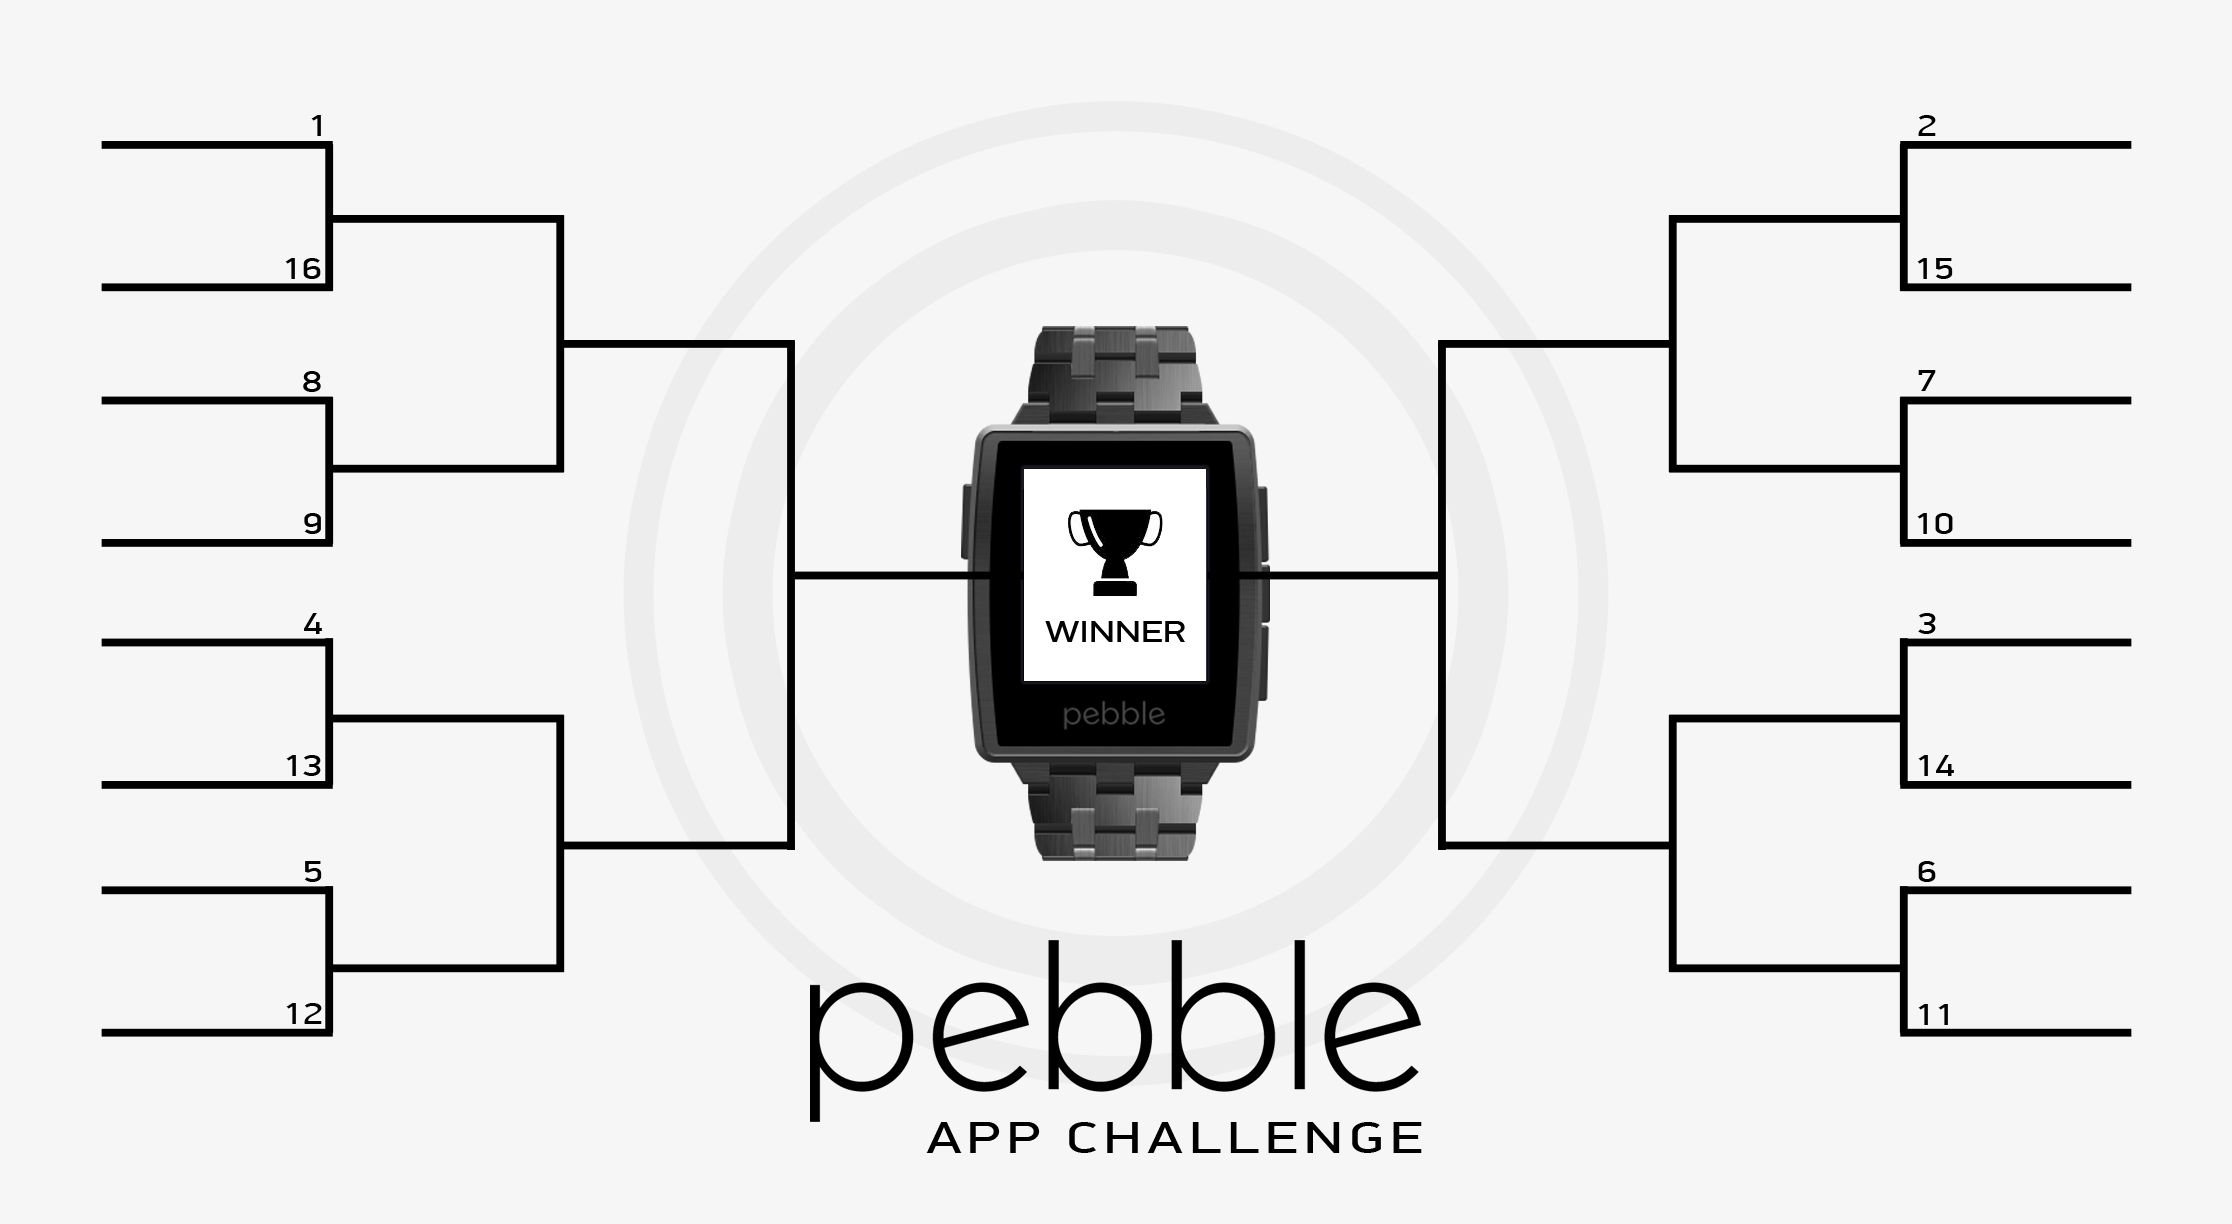 Pebble Appstore on Android App Challenge Contest